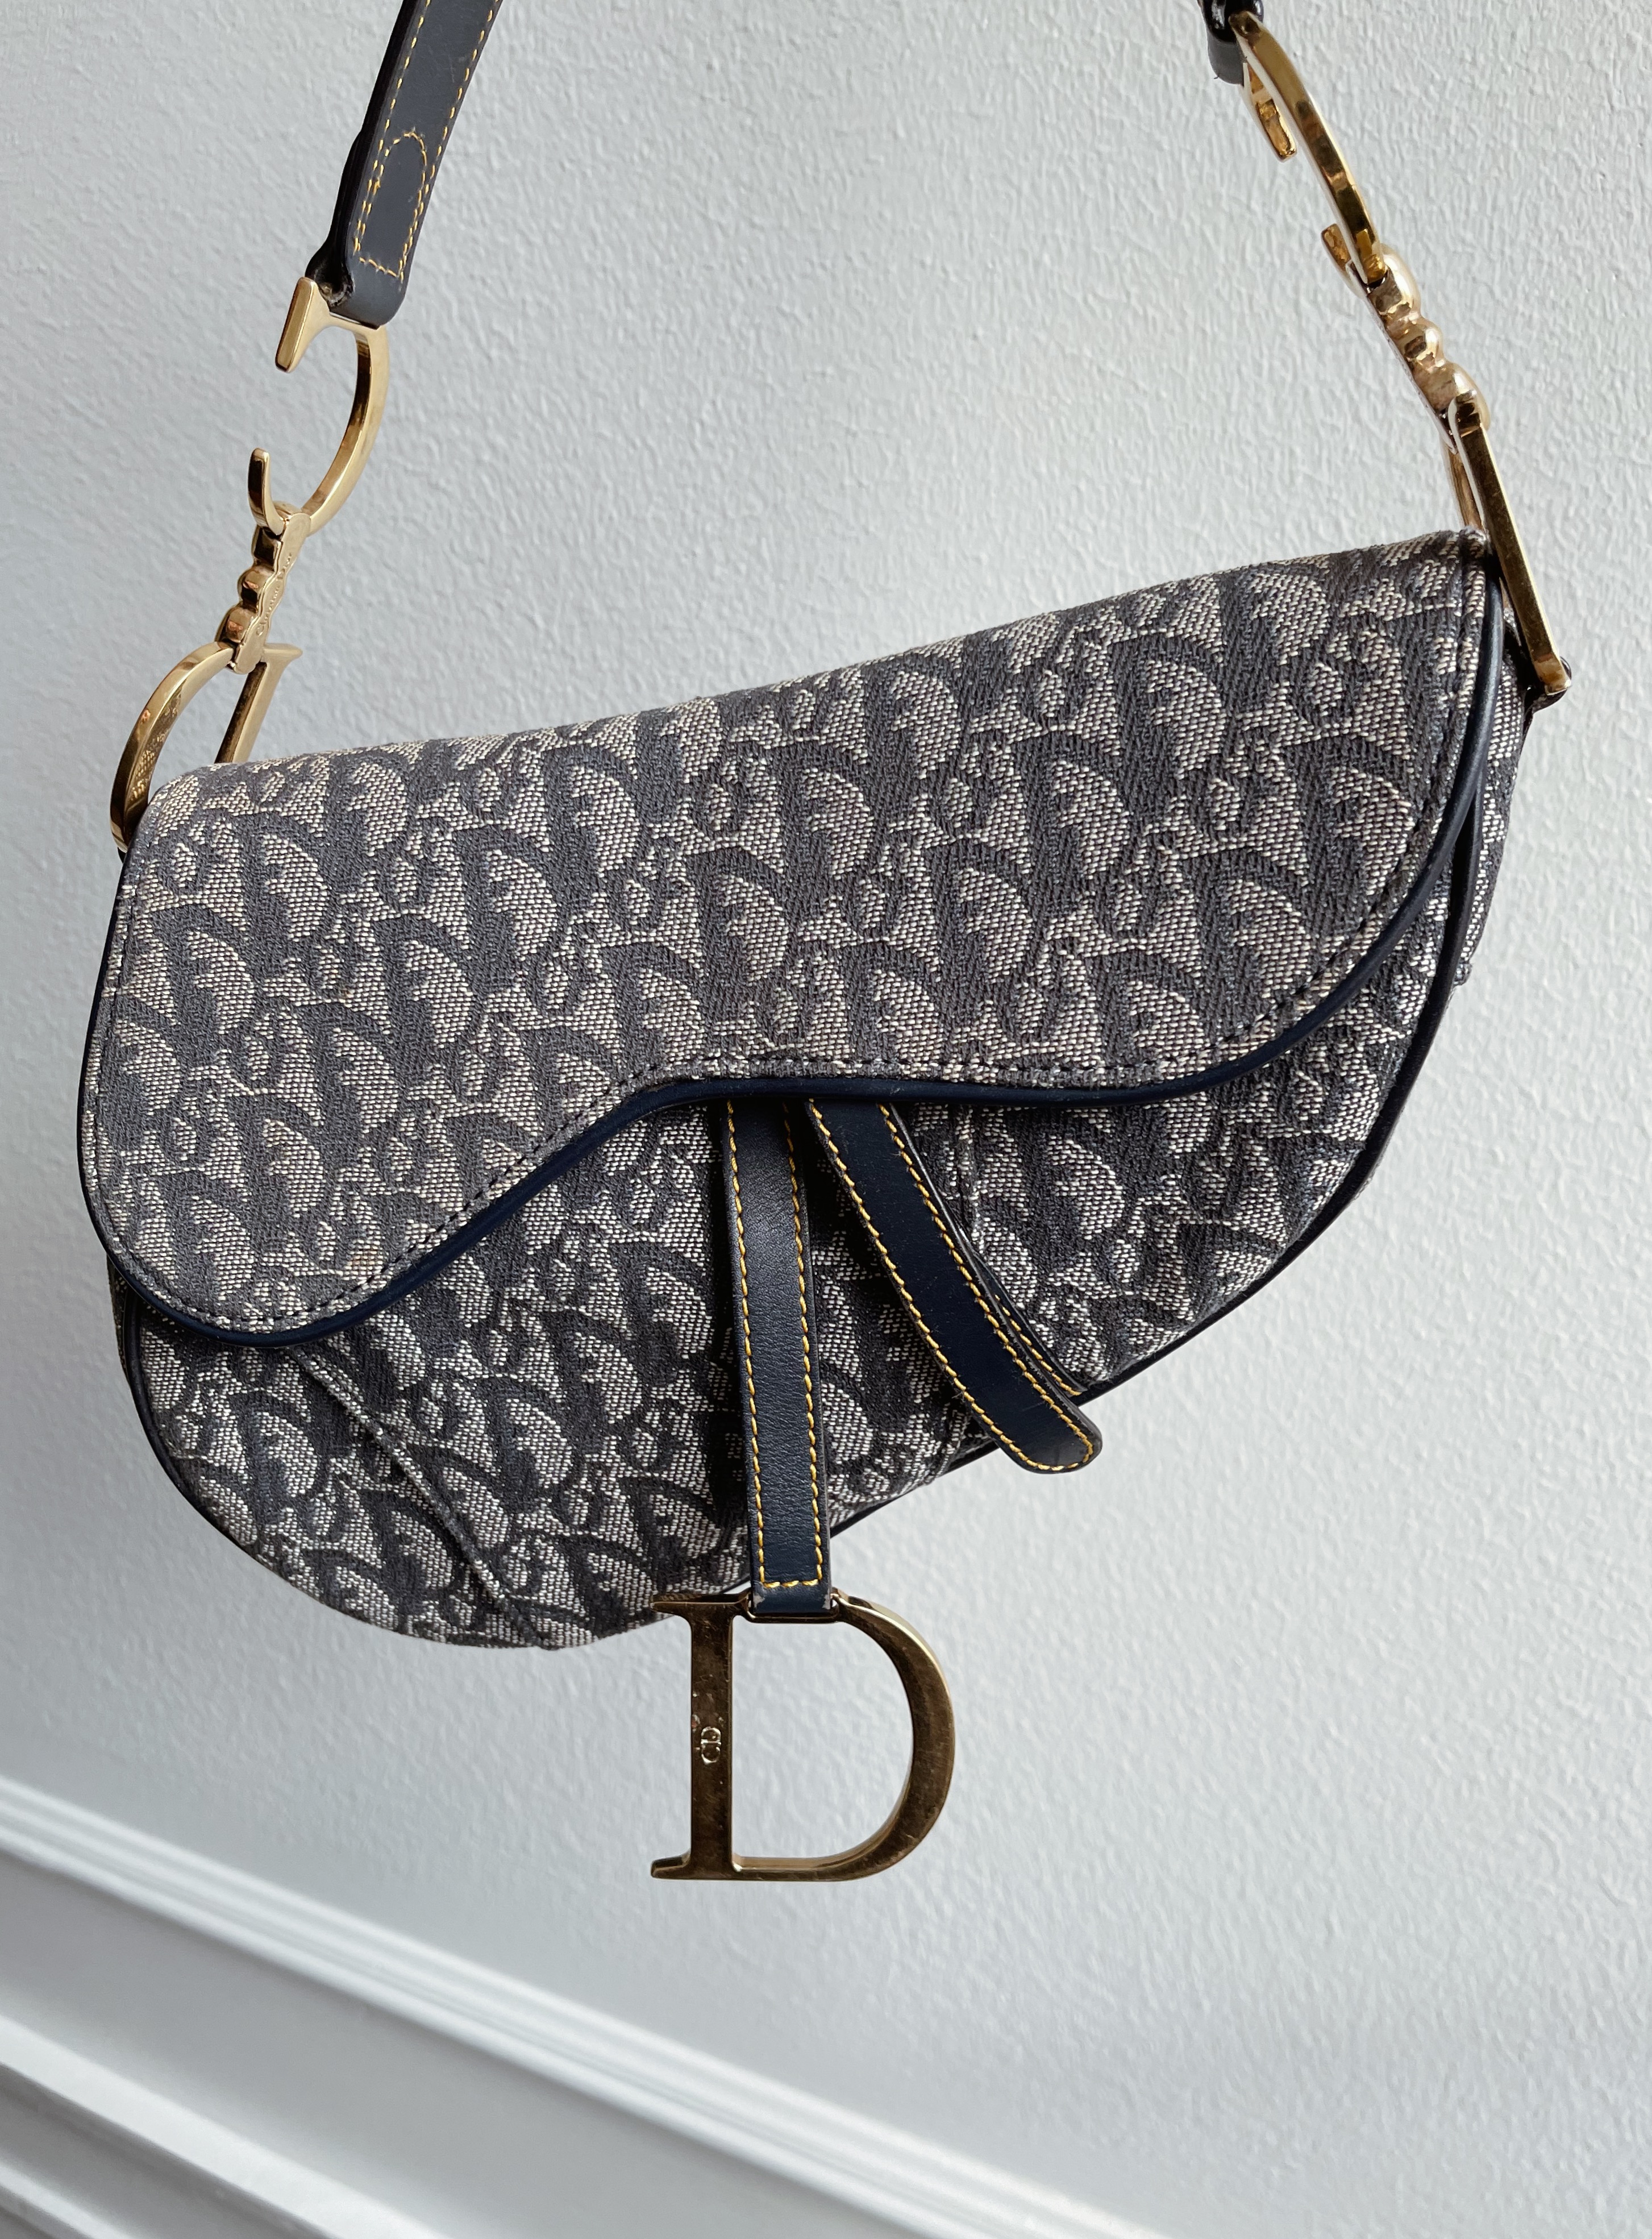 How Chinese Sellers of Fake Dior Are Evading a Crackdown Online  Bloomberg